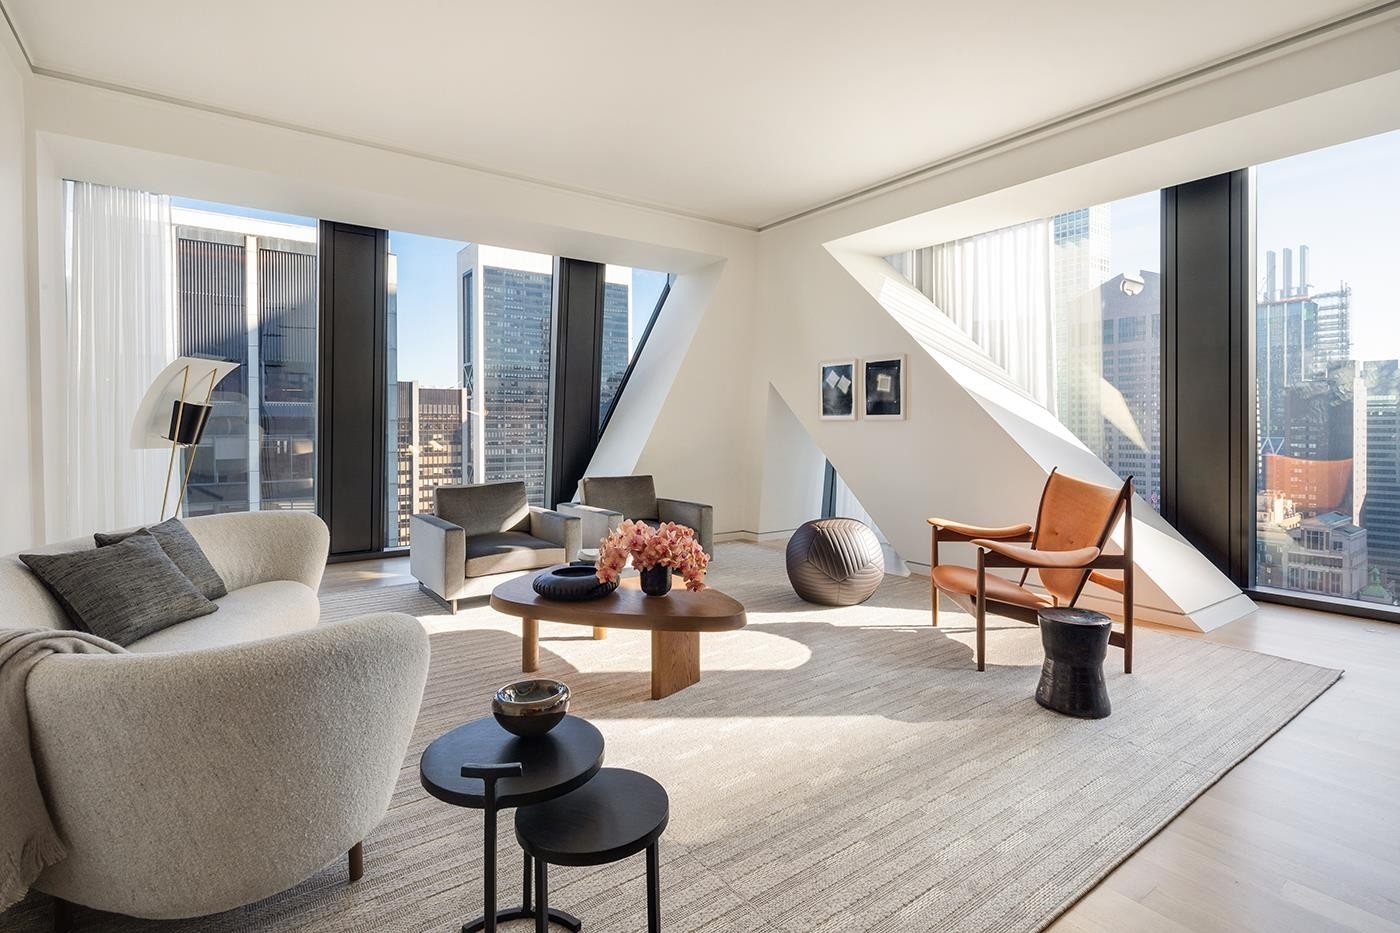 Condominium for Sale at 53W53, 53 53RD ST W, 28B Midtown West, New York, New York 10019